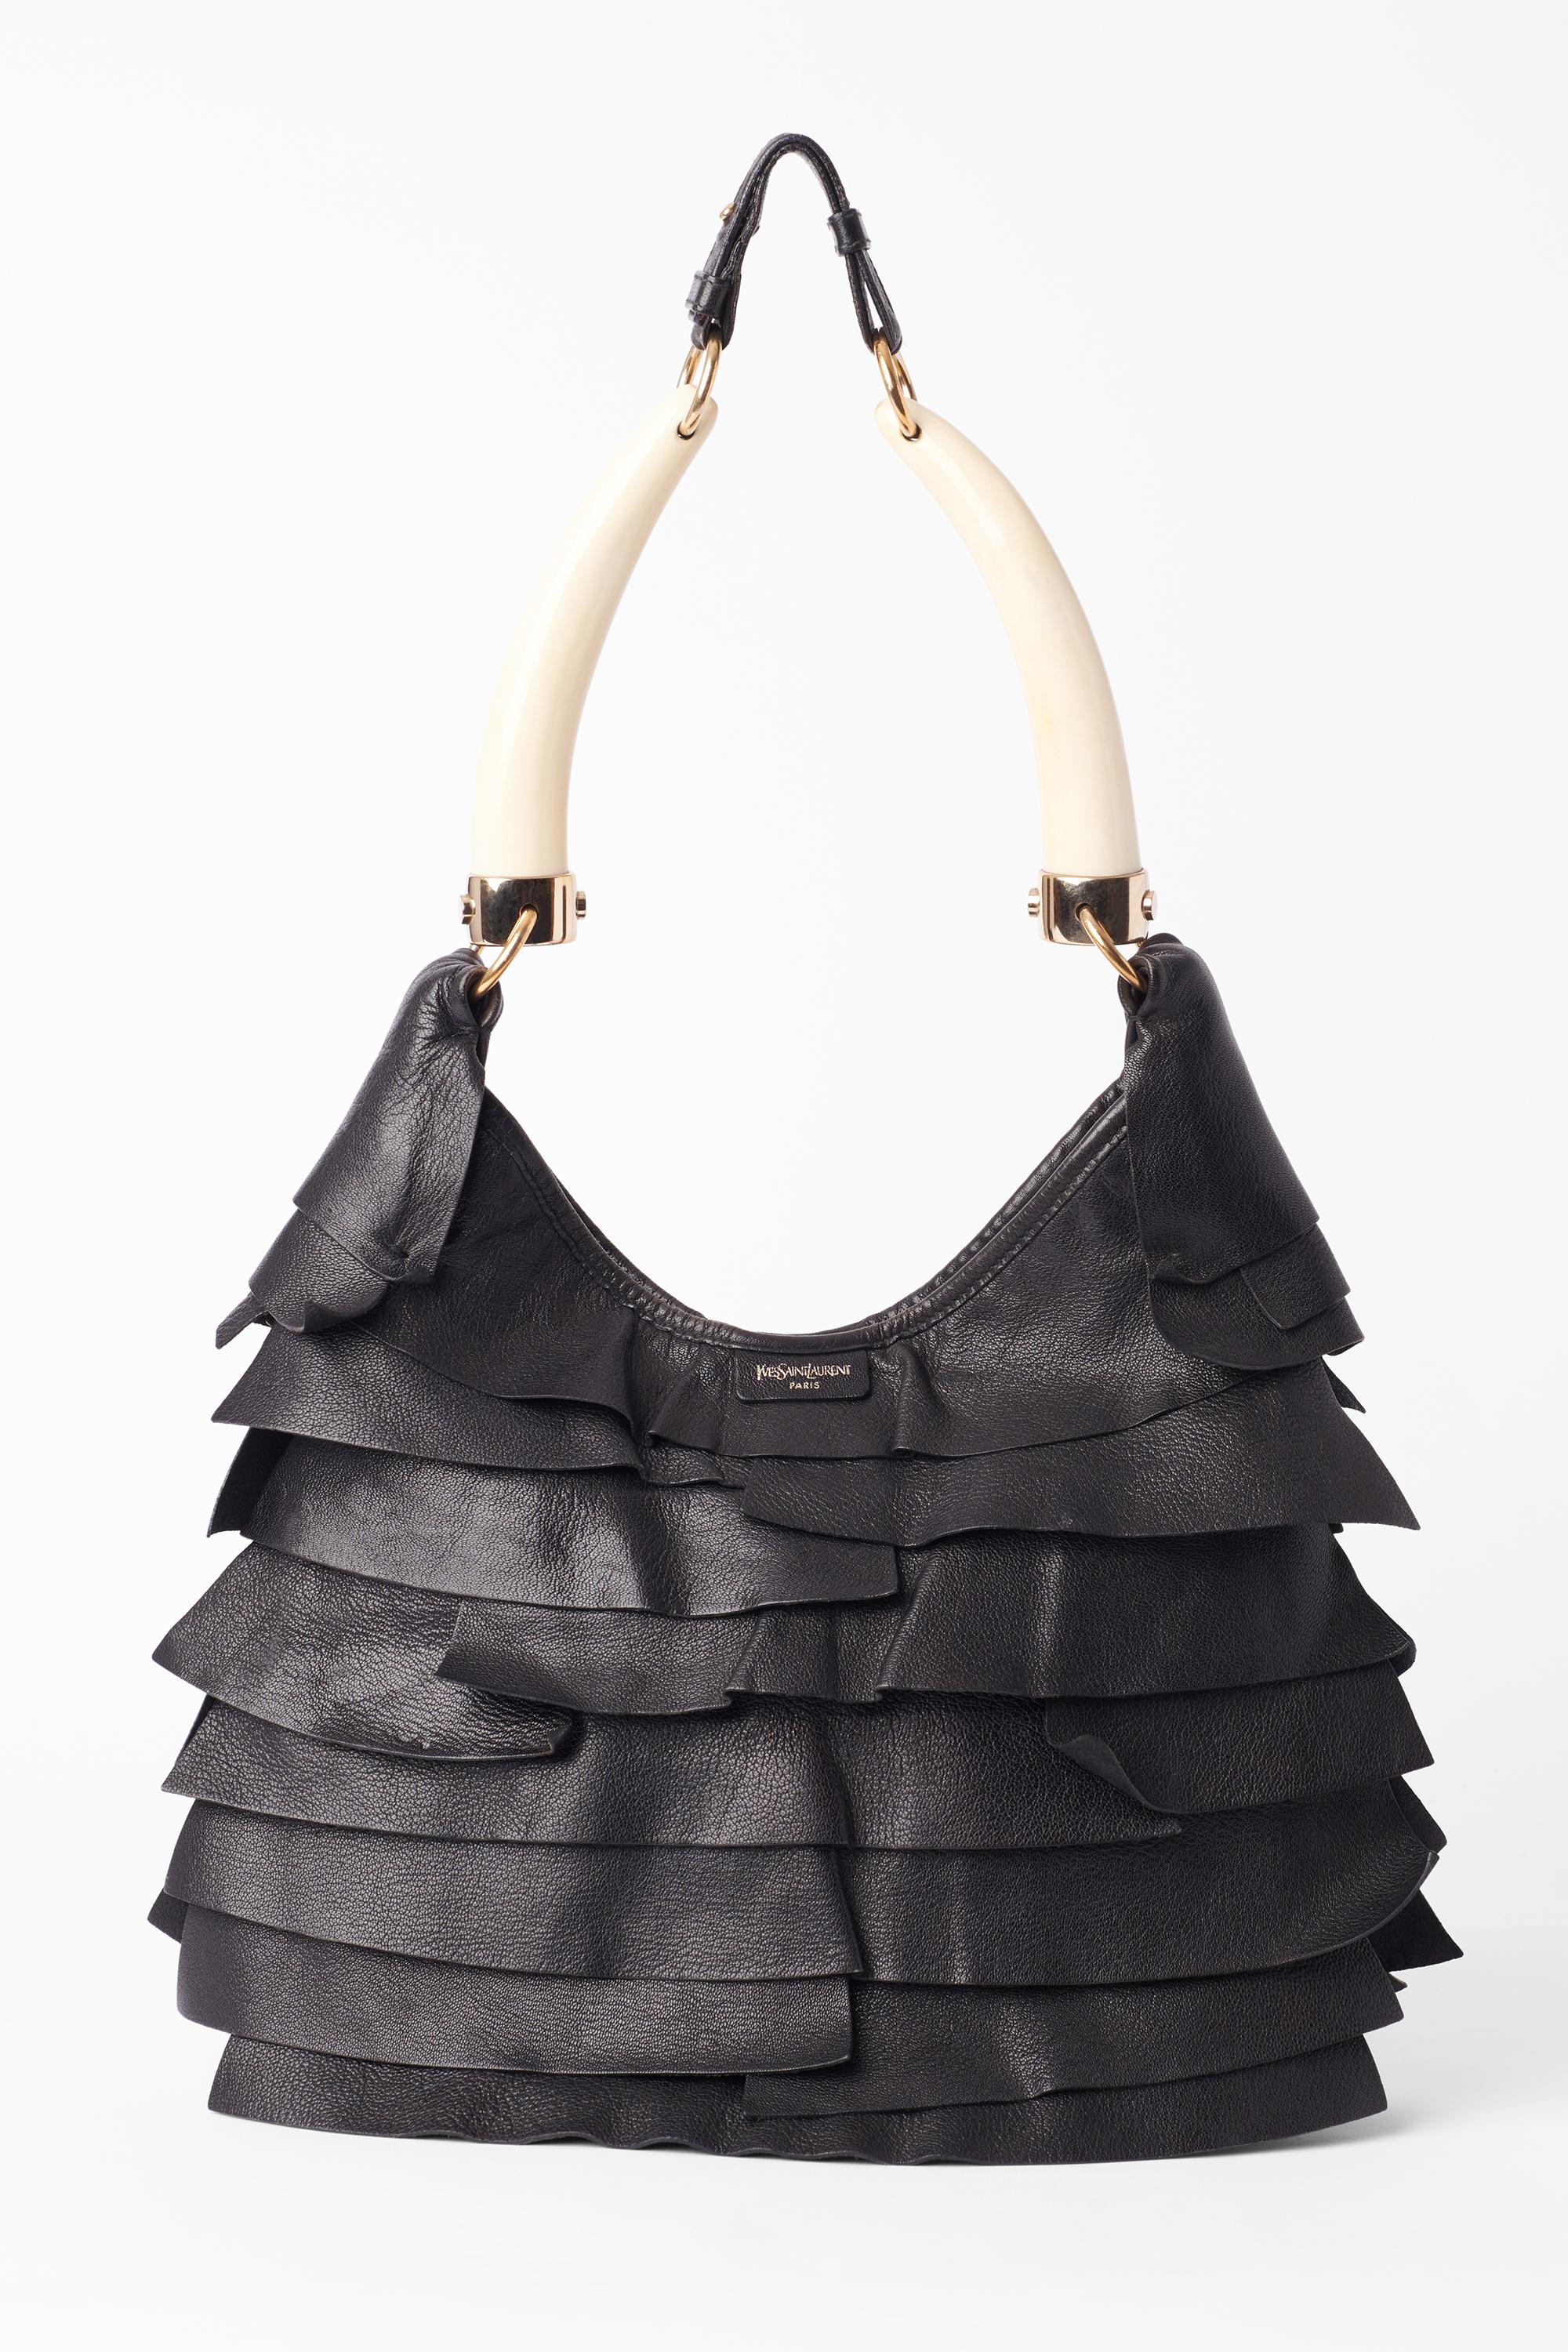 Vintage F/W 2004 Black St Tropez Ruffled Bag In Excellent Condition For Sale In London, GB